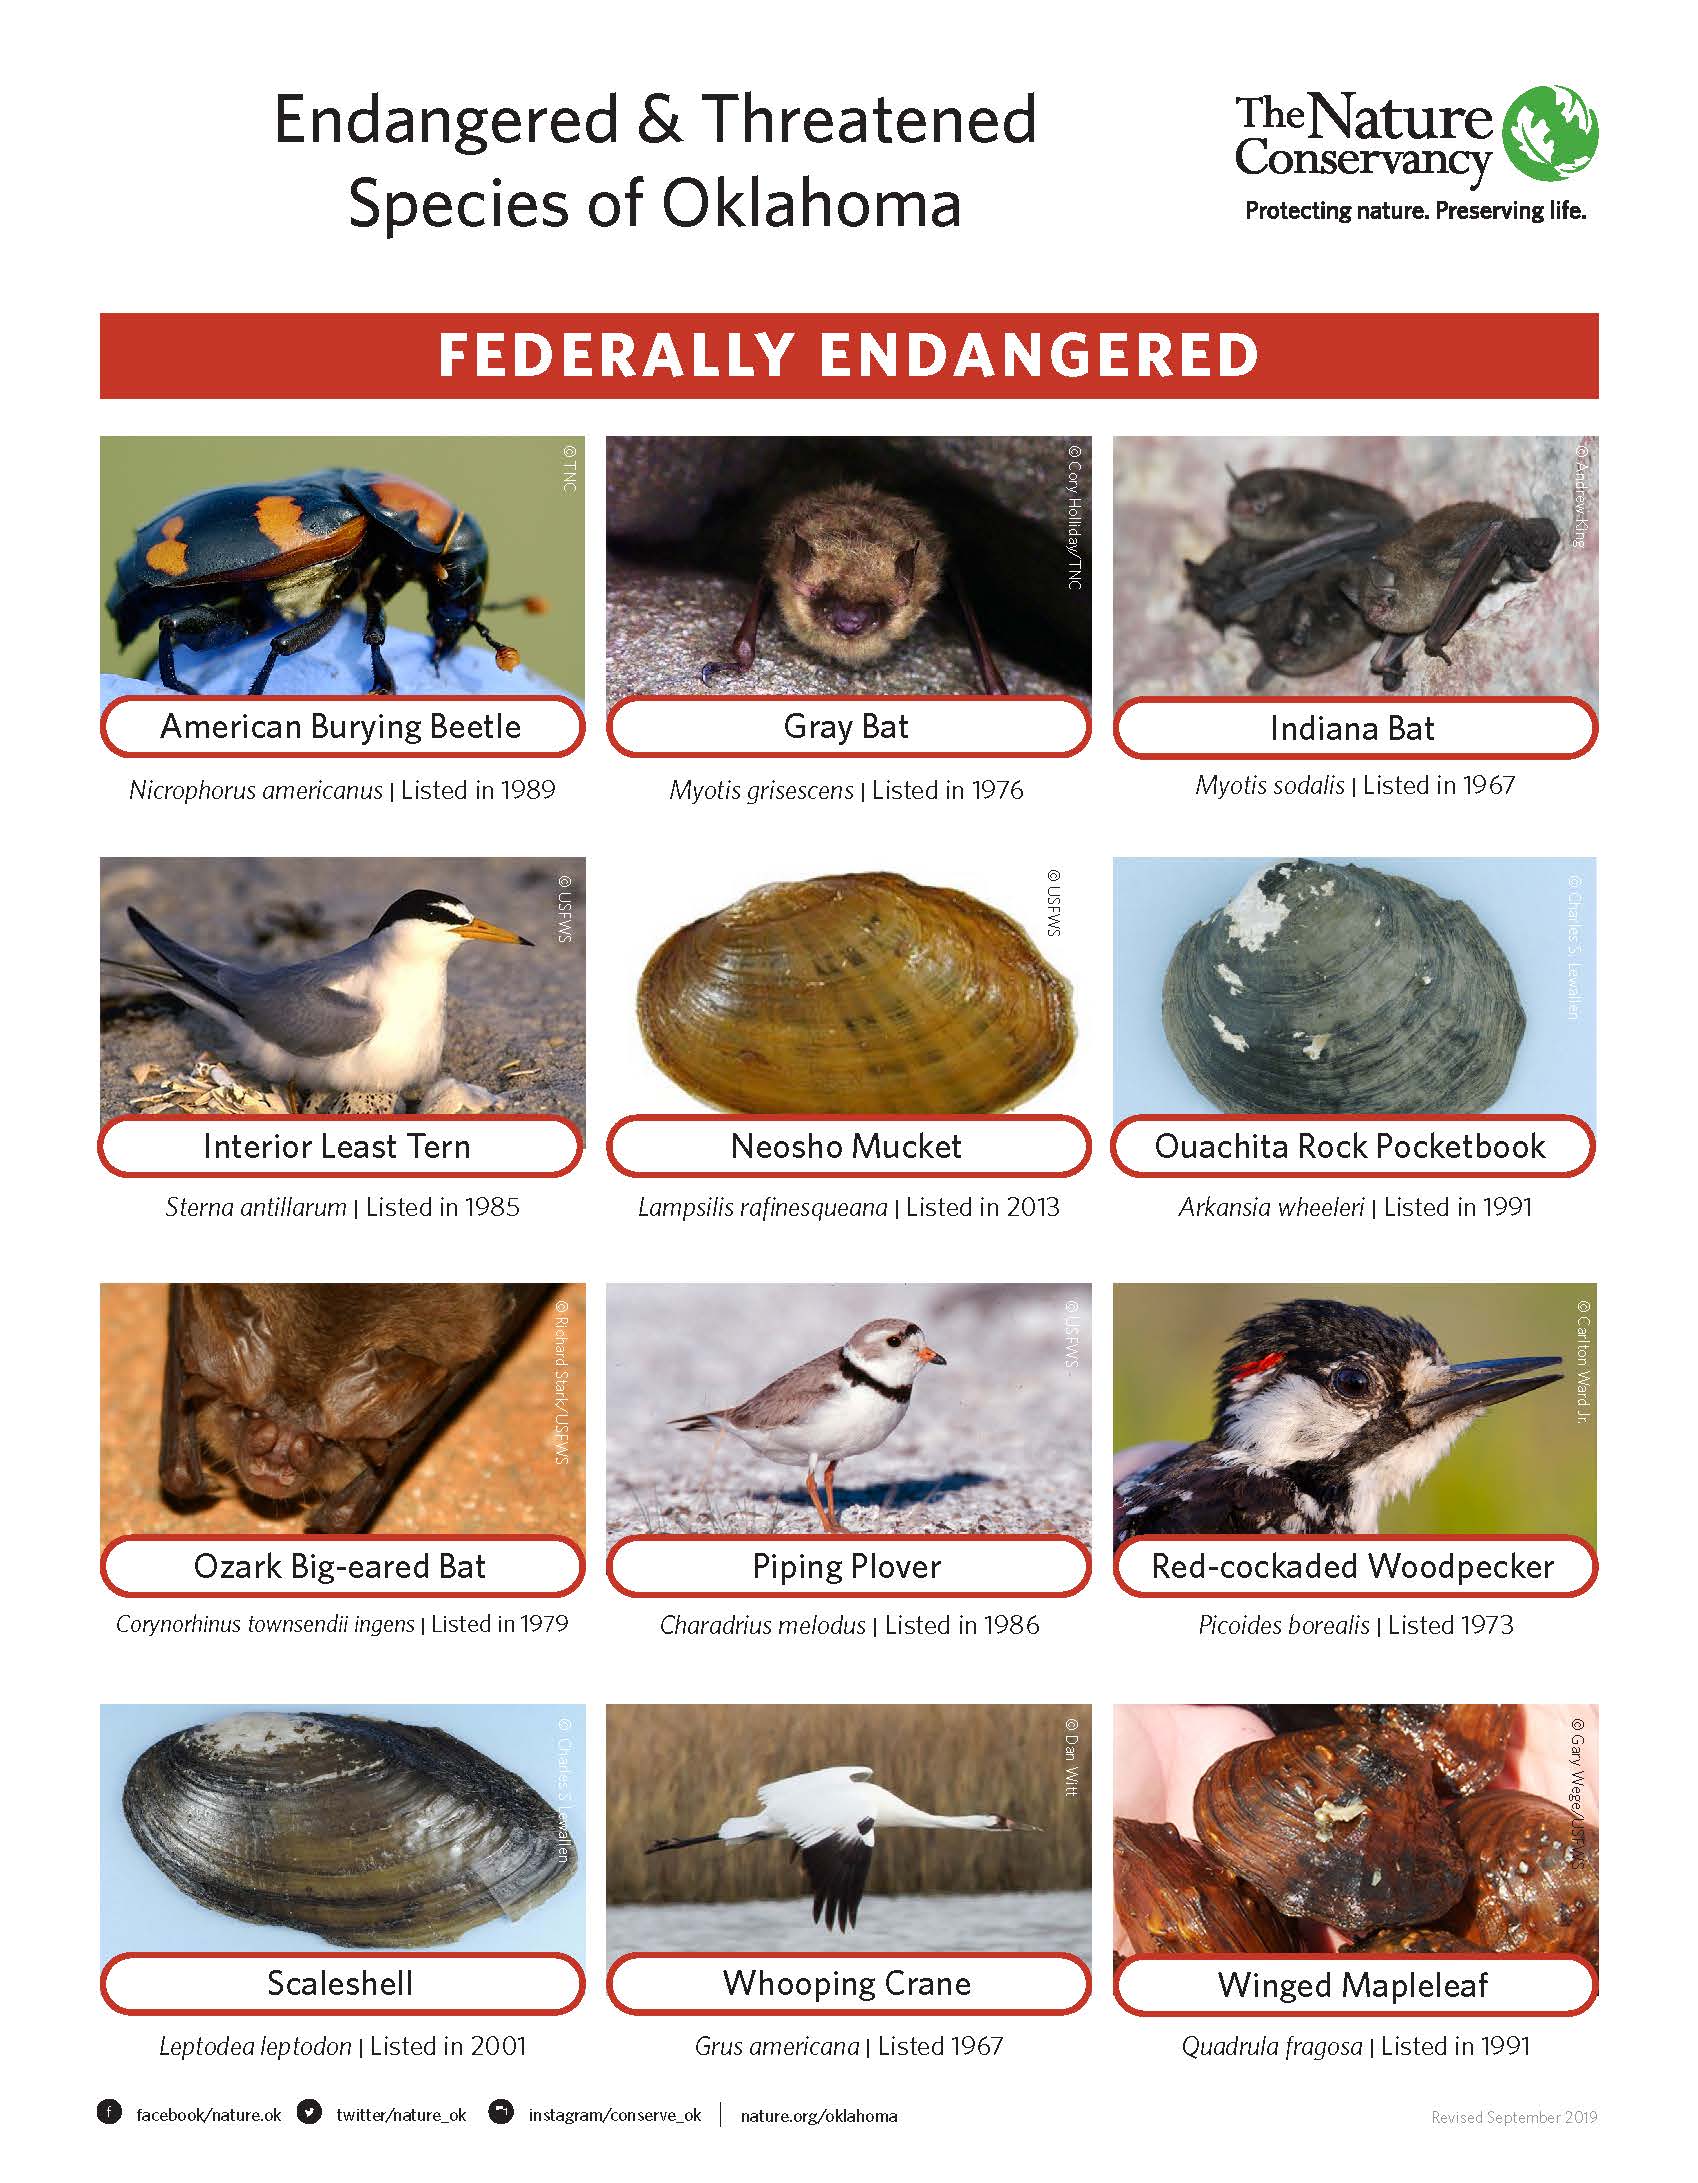 List of threatened and endangered species in Oklahoma.